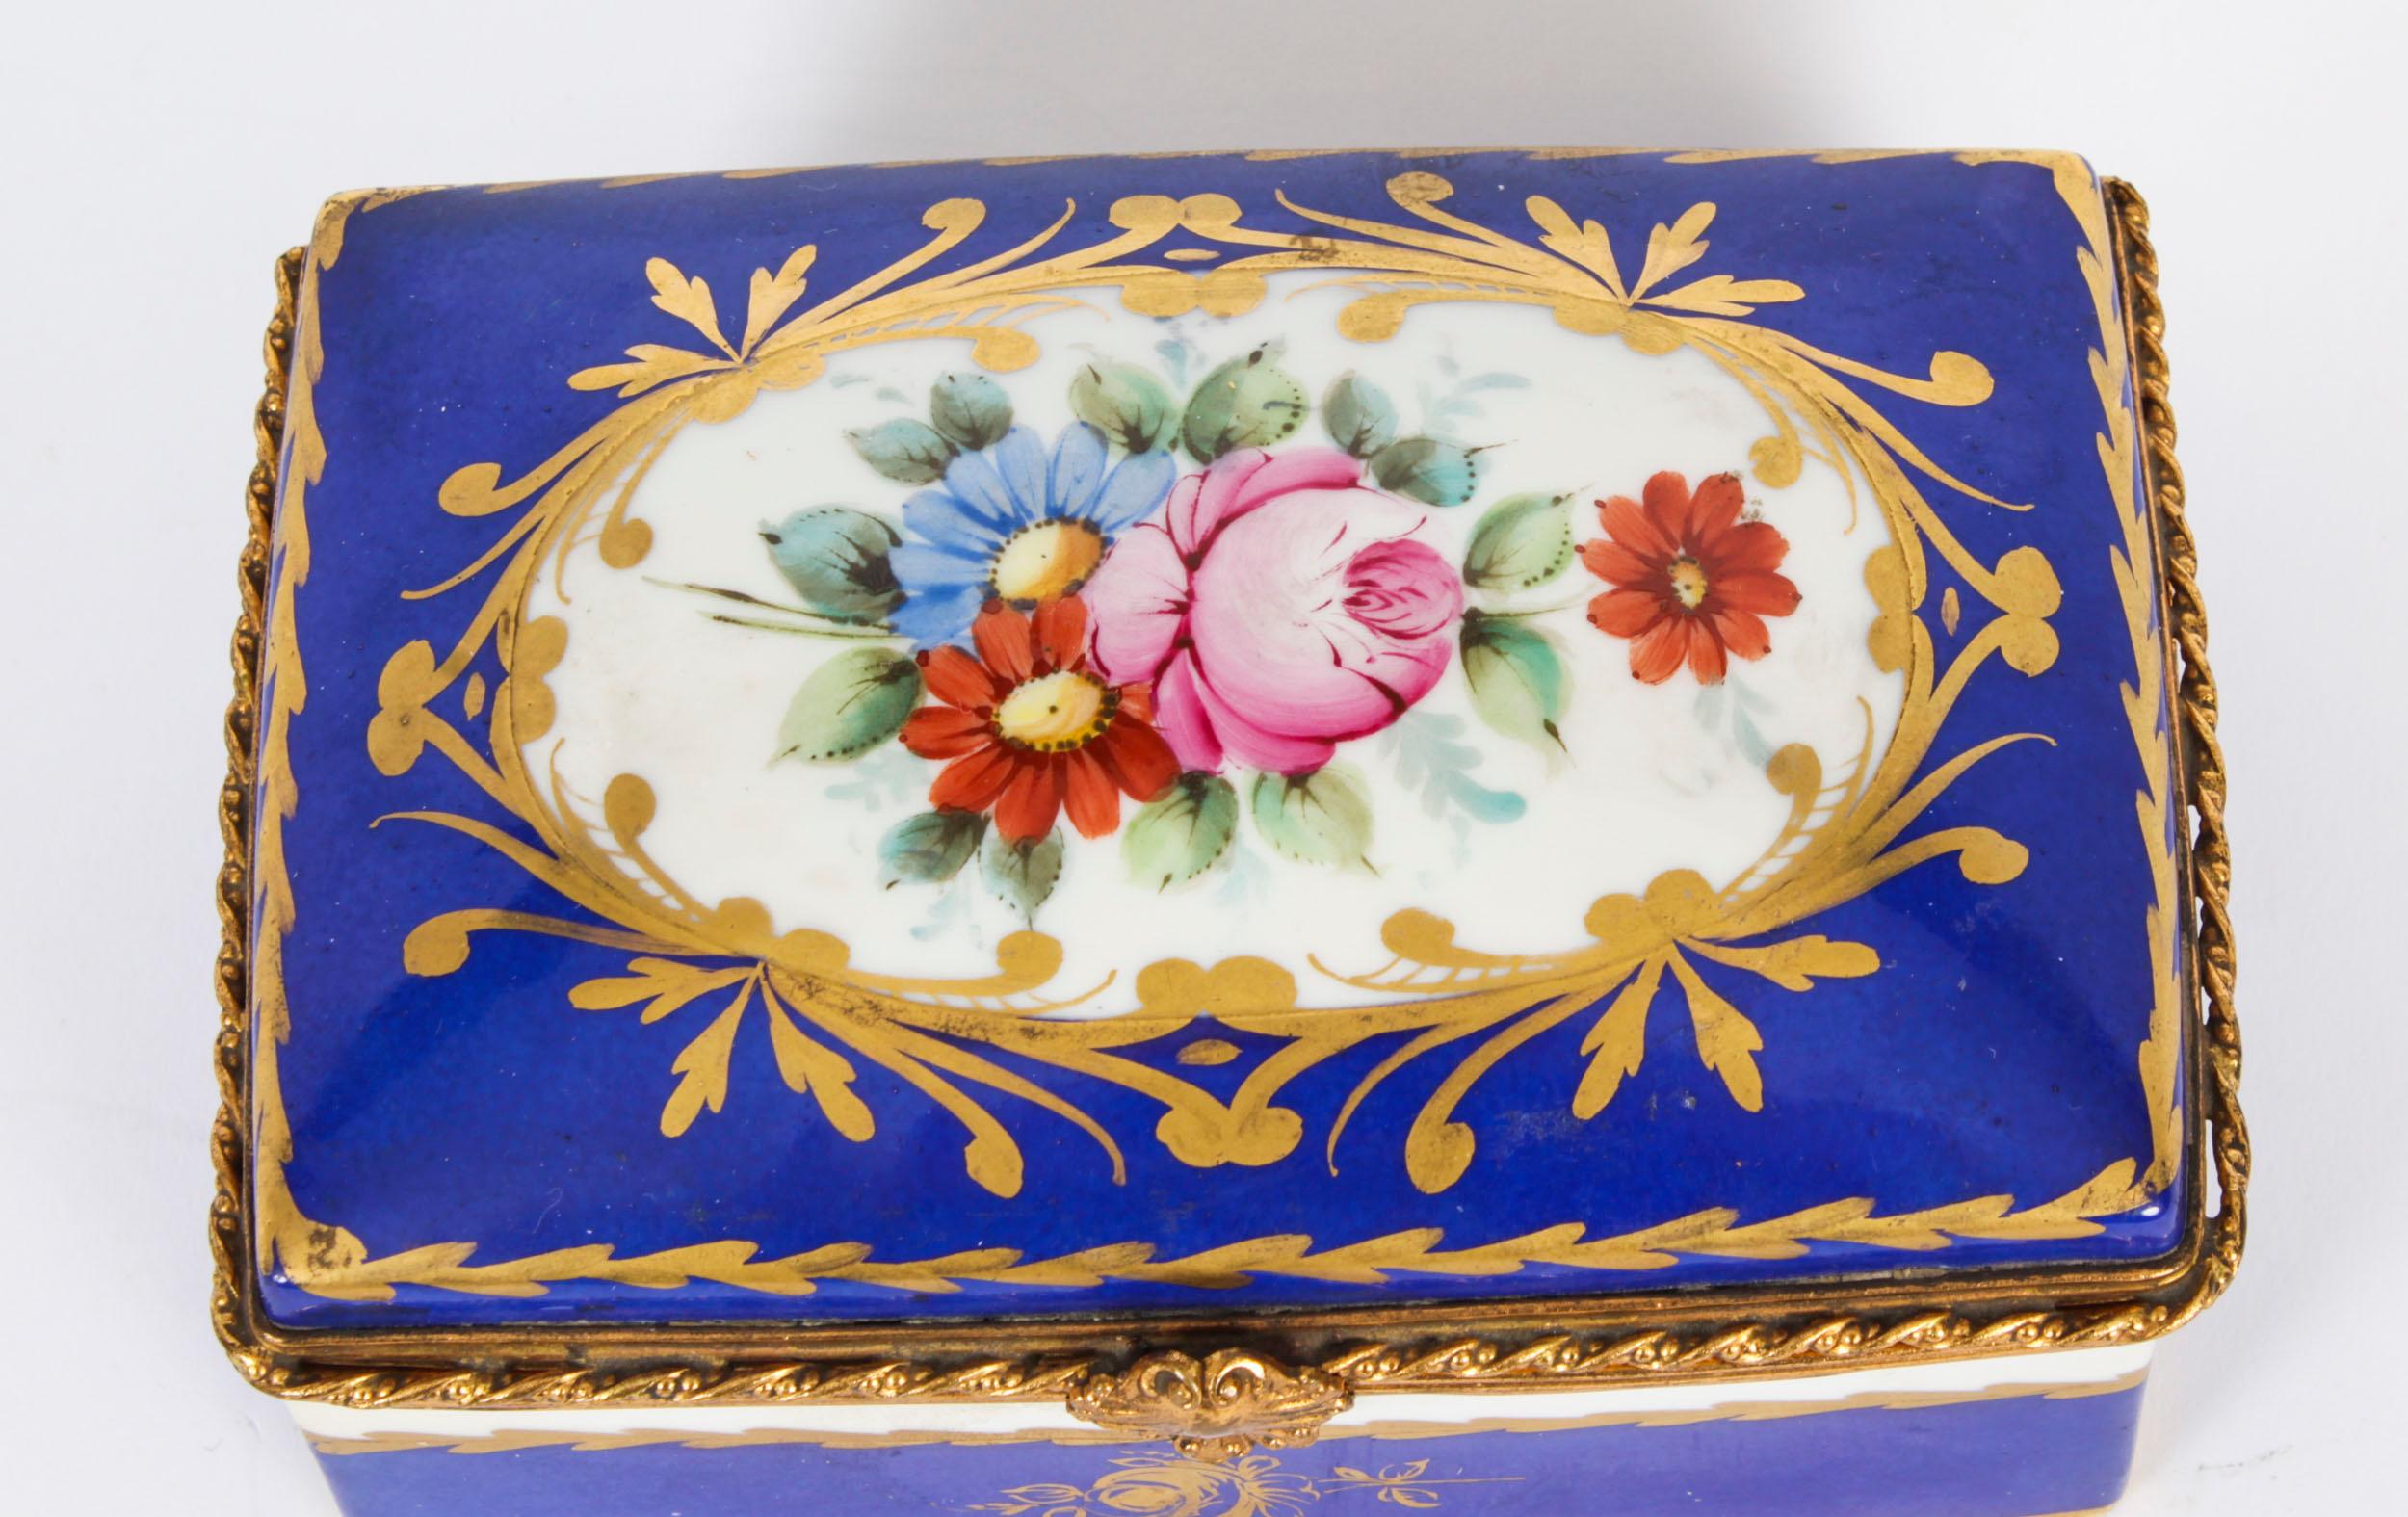 French Antique Limoges Royal Blue Ormolu Mounted Casket Box 19h Century For Sale